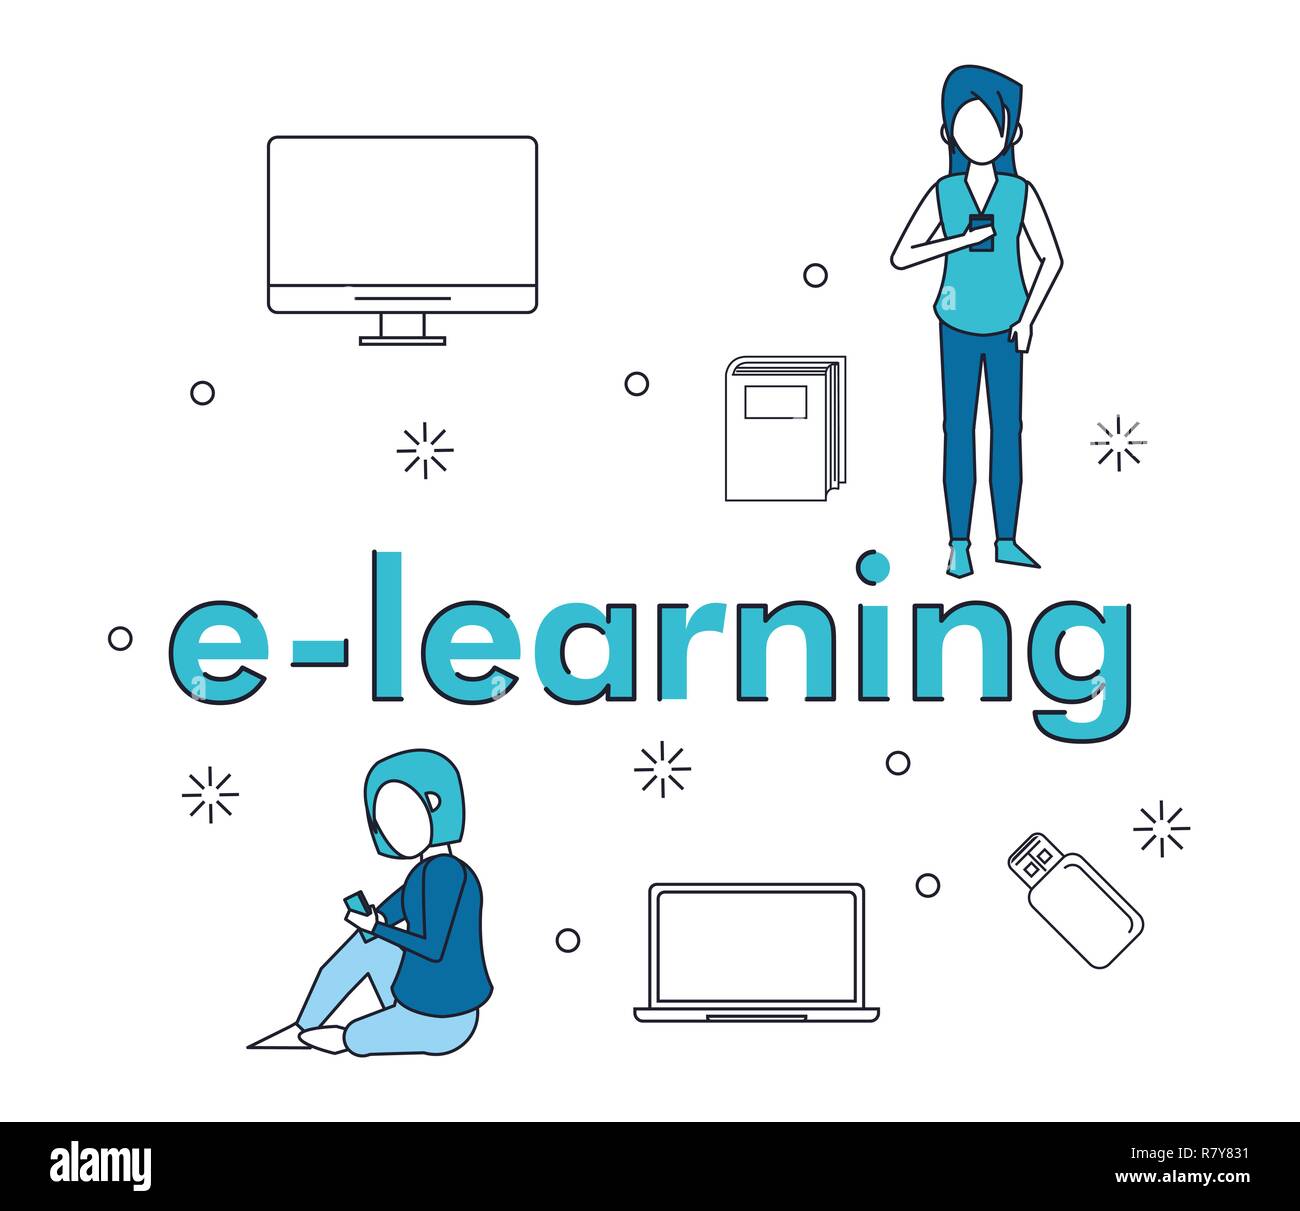 e learning couple elements Stock Vector